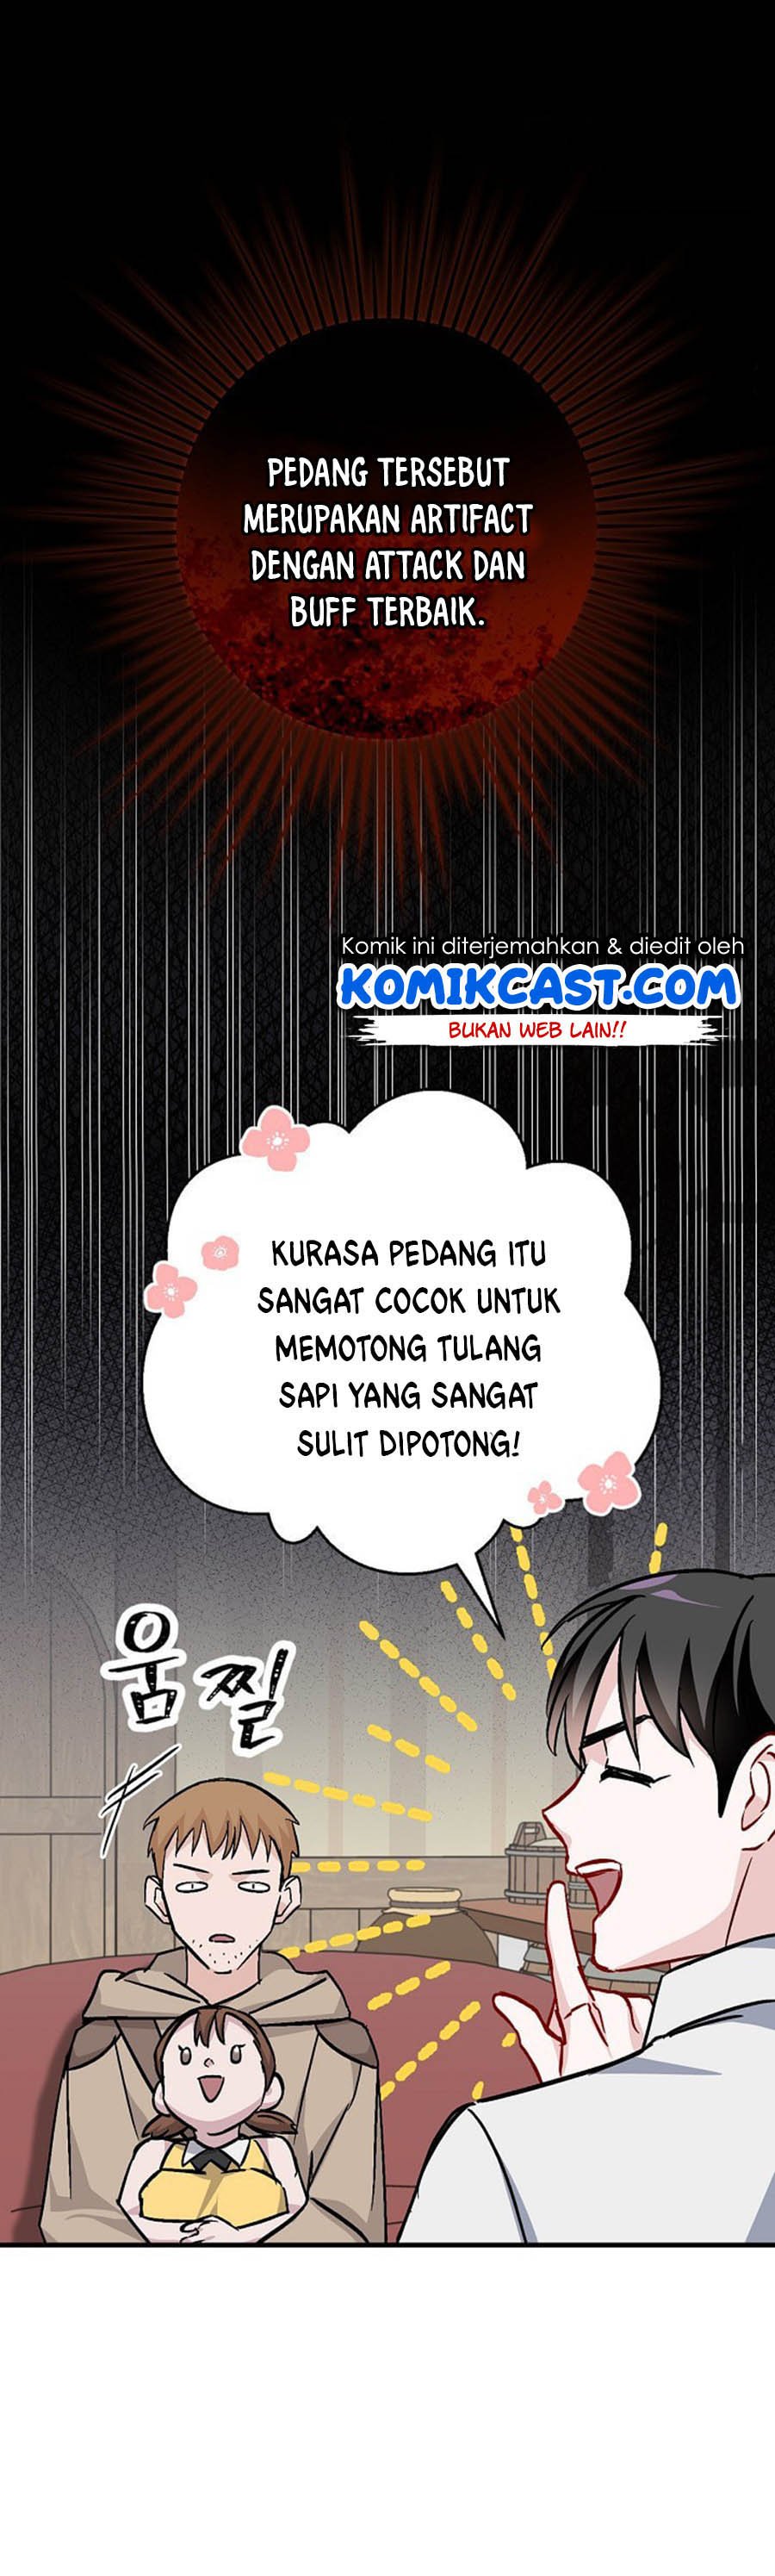 Leveling Up, by Only Eating! Chapter 35